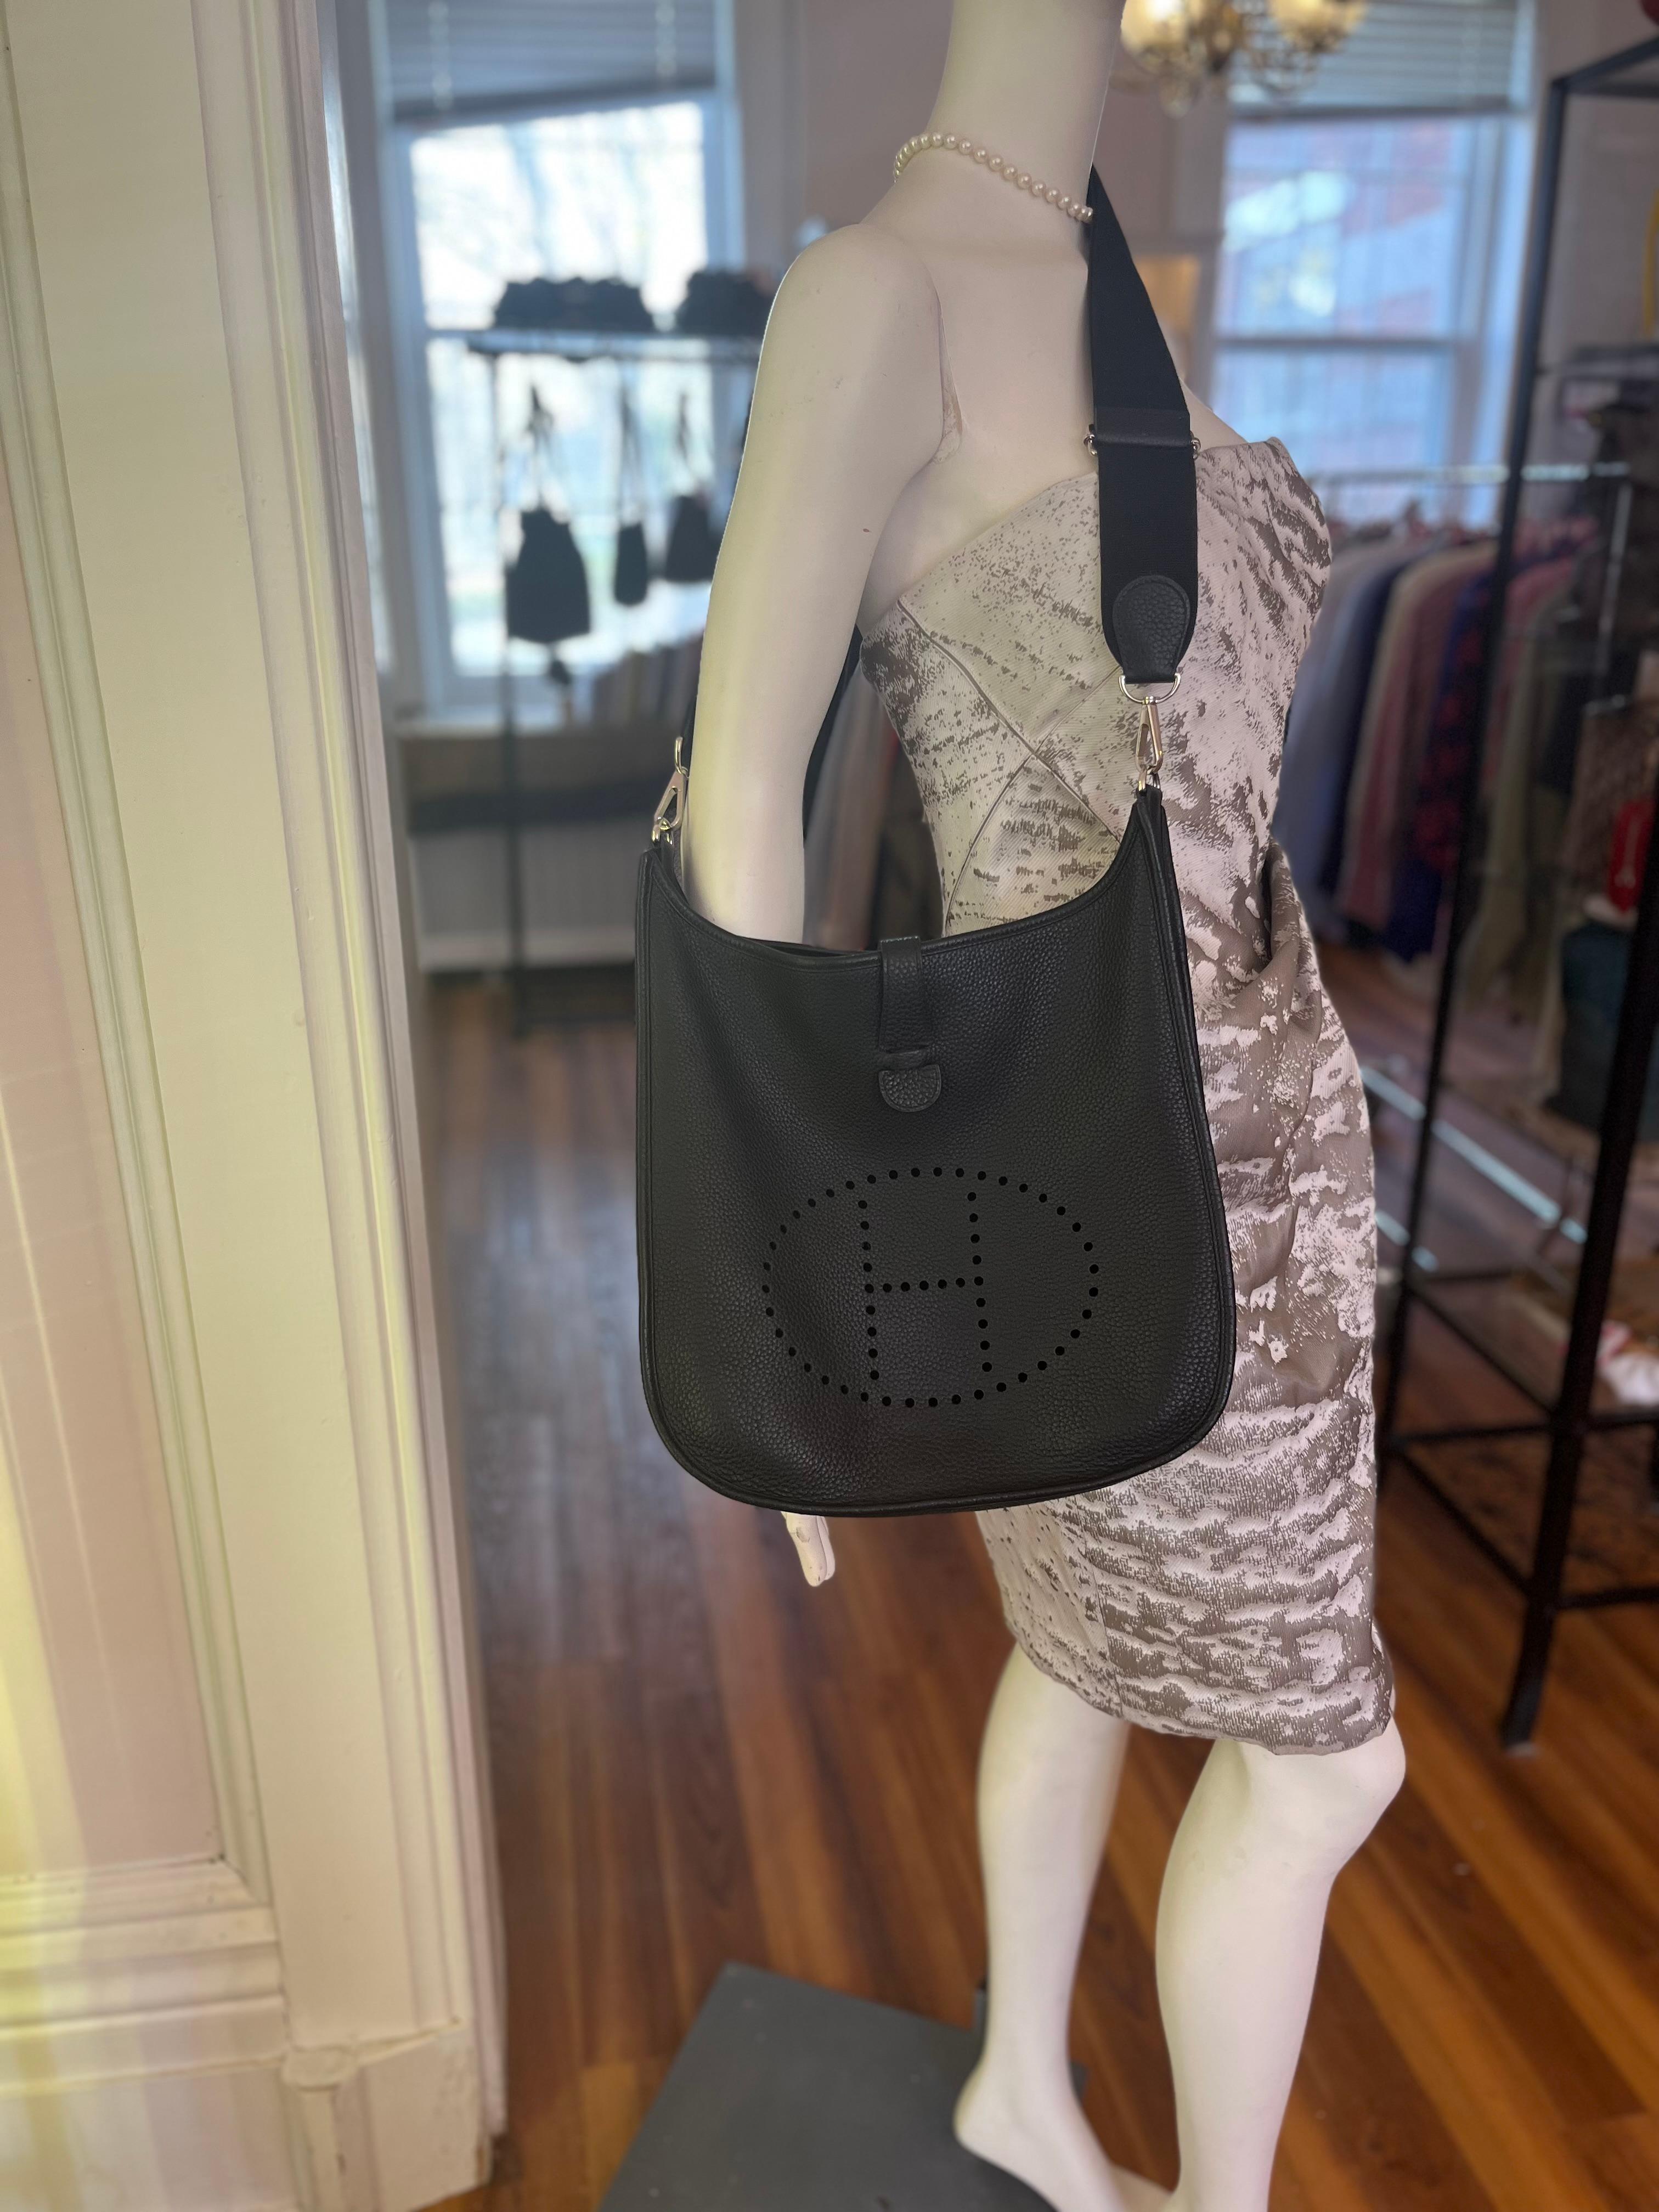 In amazing condition this Hermes Evelyne 3 GM is fashioned of Clemence leather. It is a nice wide shoulder/crossbody bag with a wide strap. The interior is very generous and there is a rear outside pocket. The hardware is made of palladium.